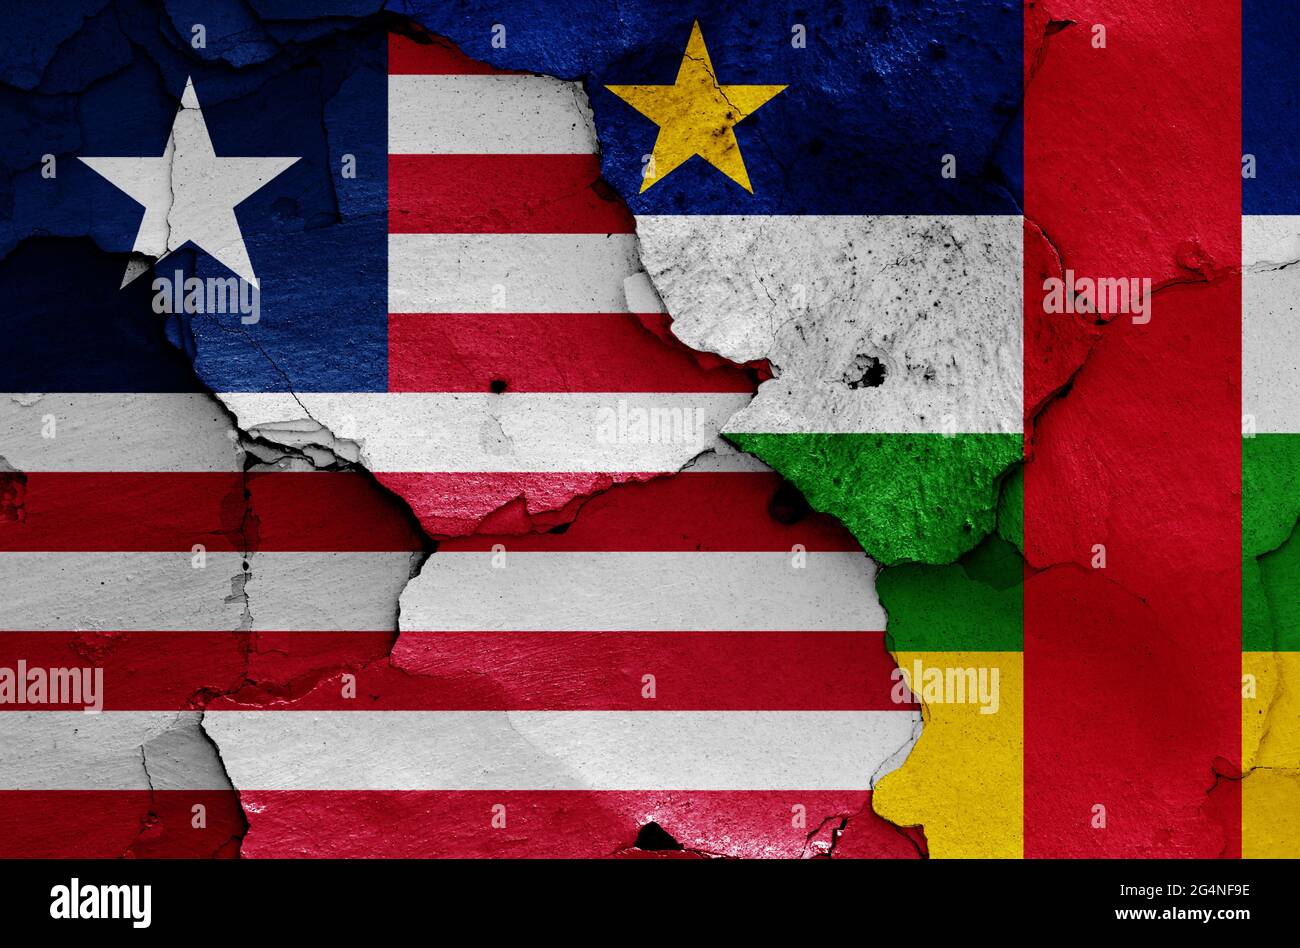 flags of Liberia and Central African Republic painted on cracked wall Stock Photo